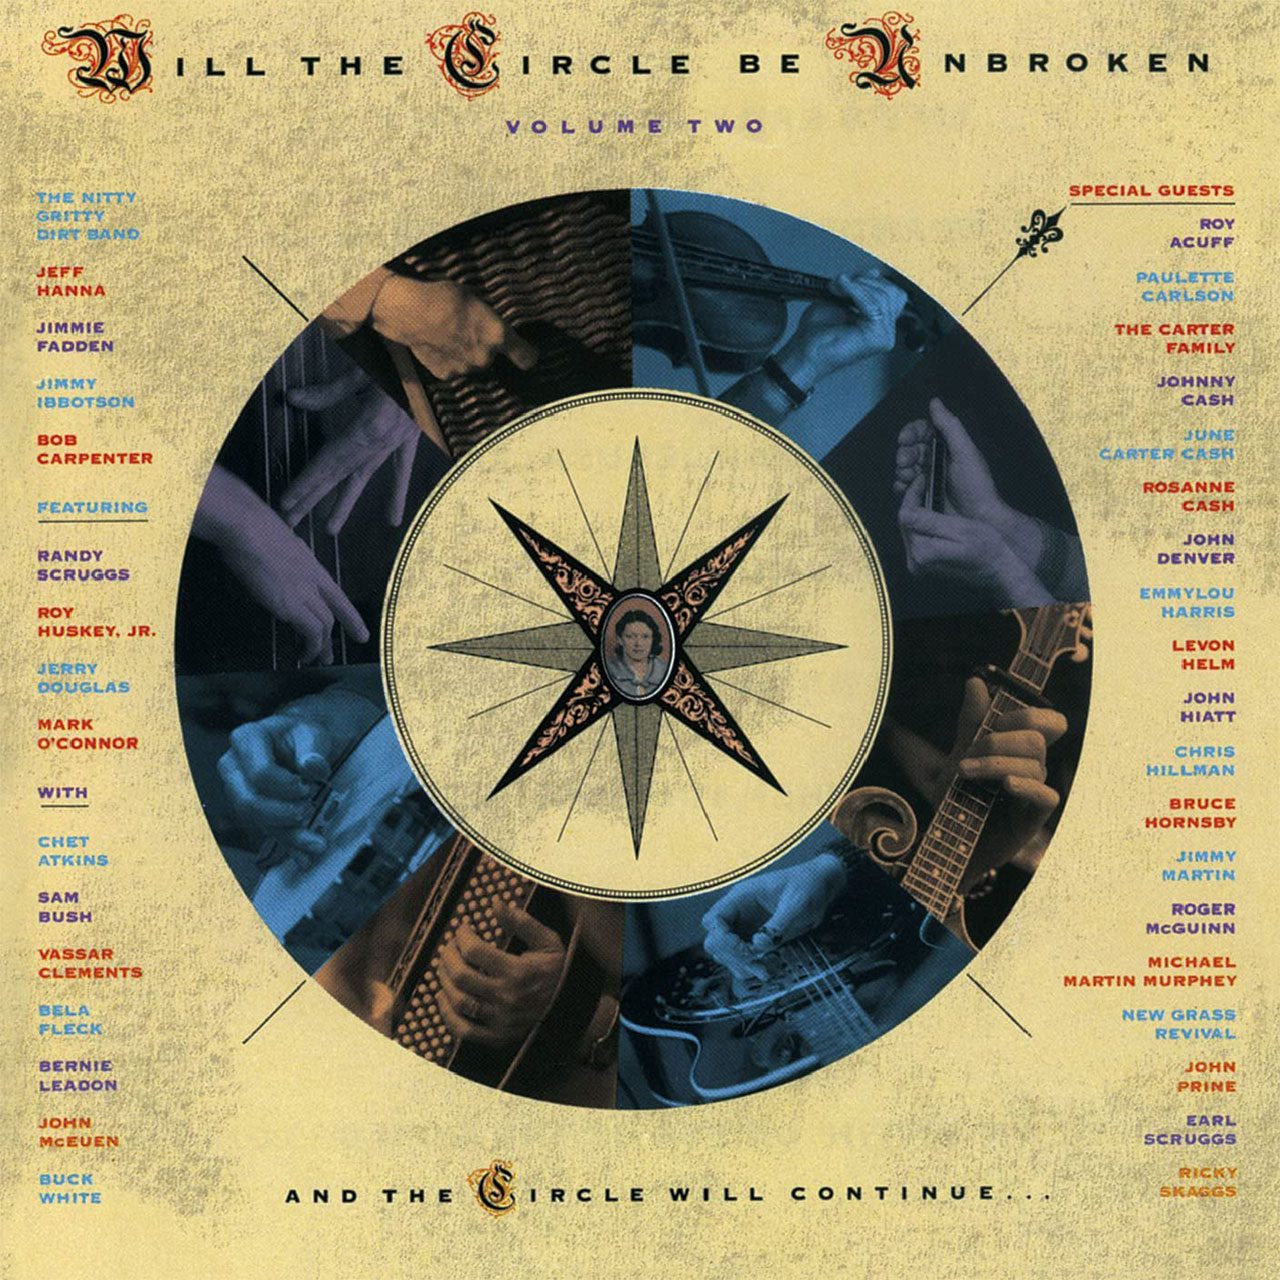 Nitty Gritty Dirt Band – The Circle Forever cover album